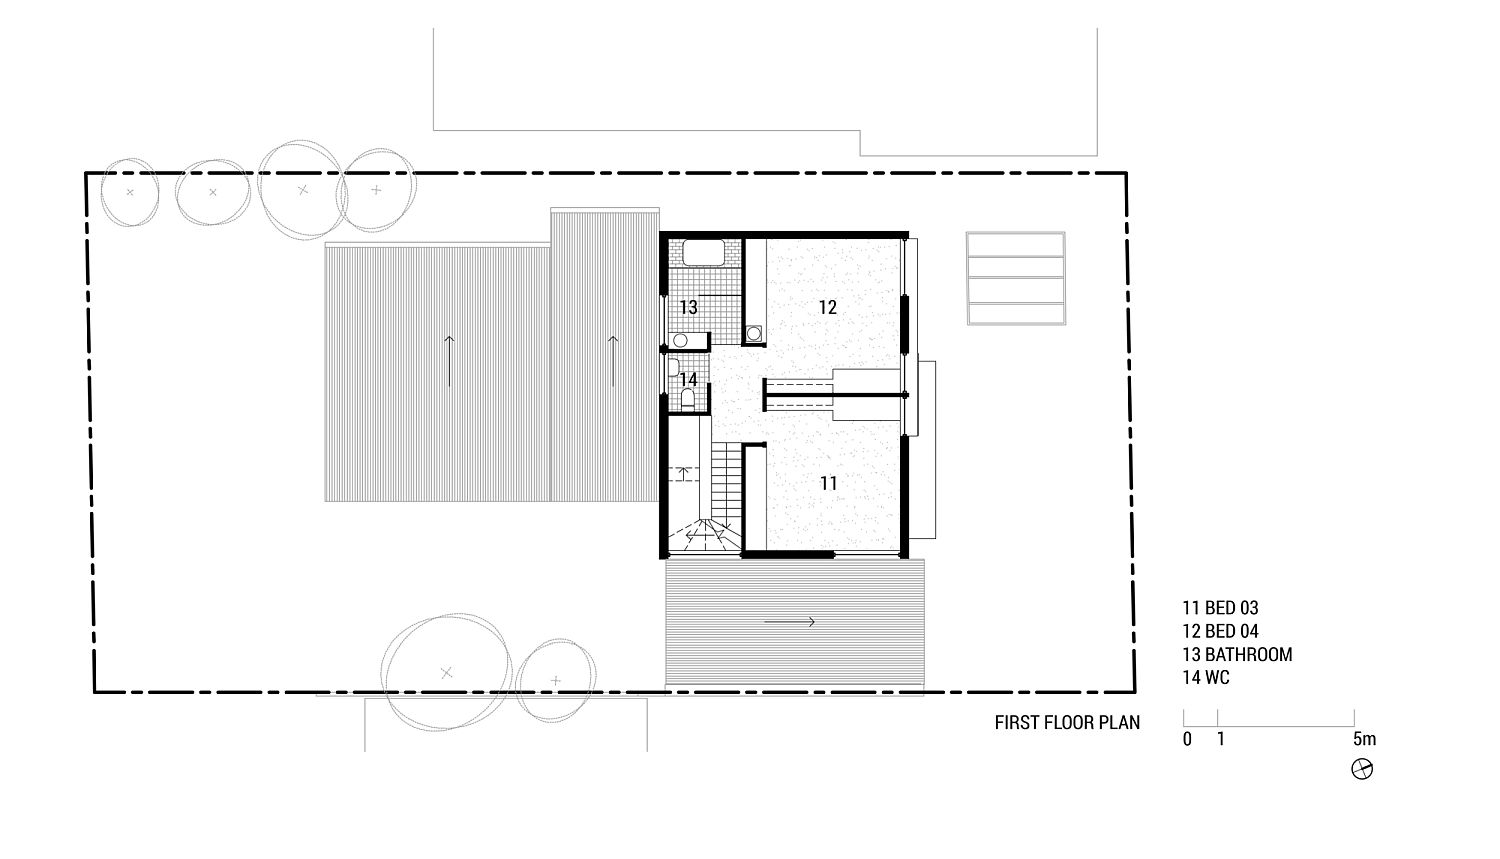 Second floor plan of Ruby Residence